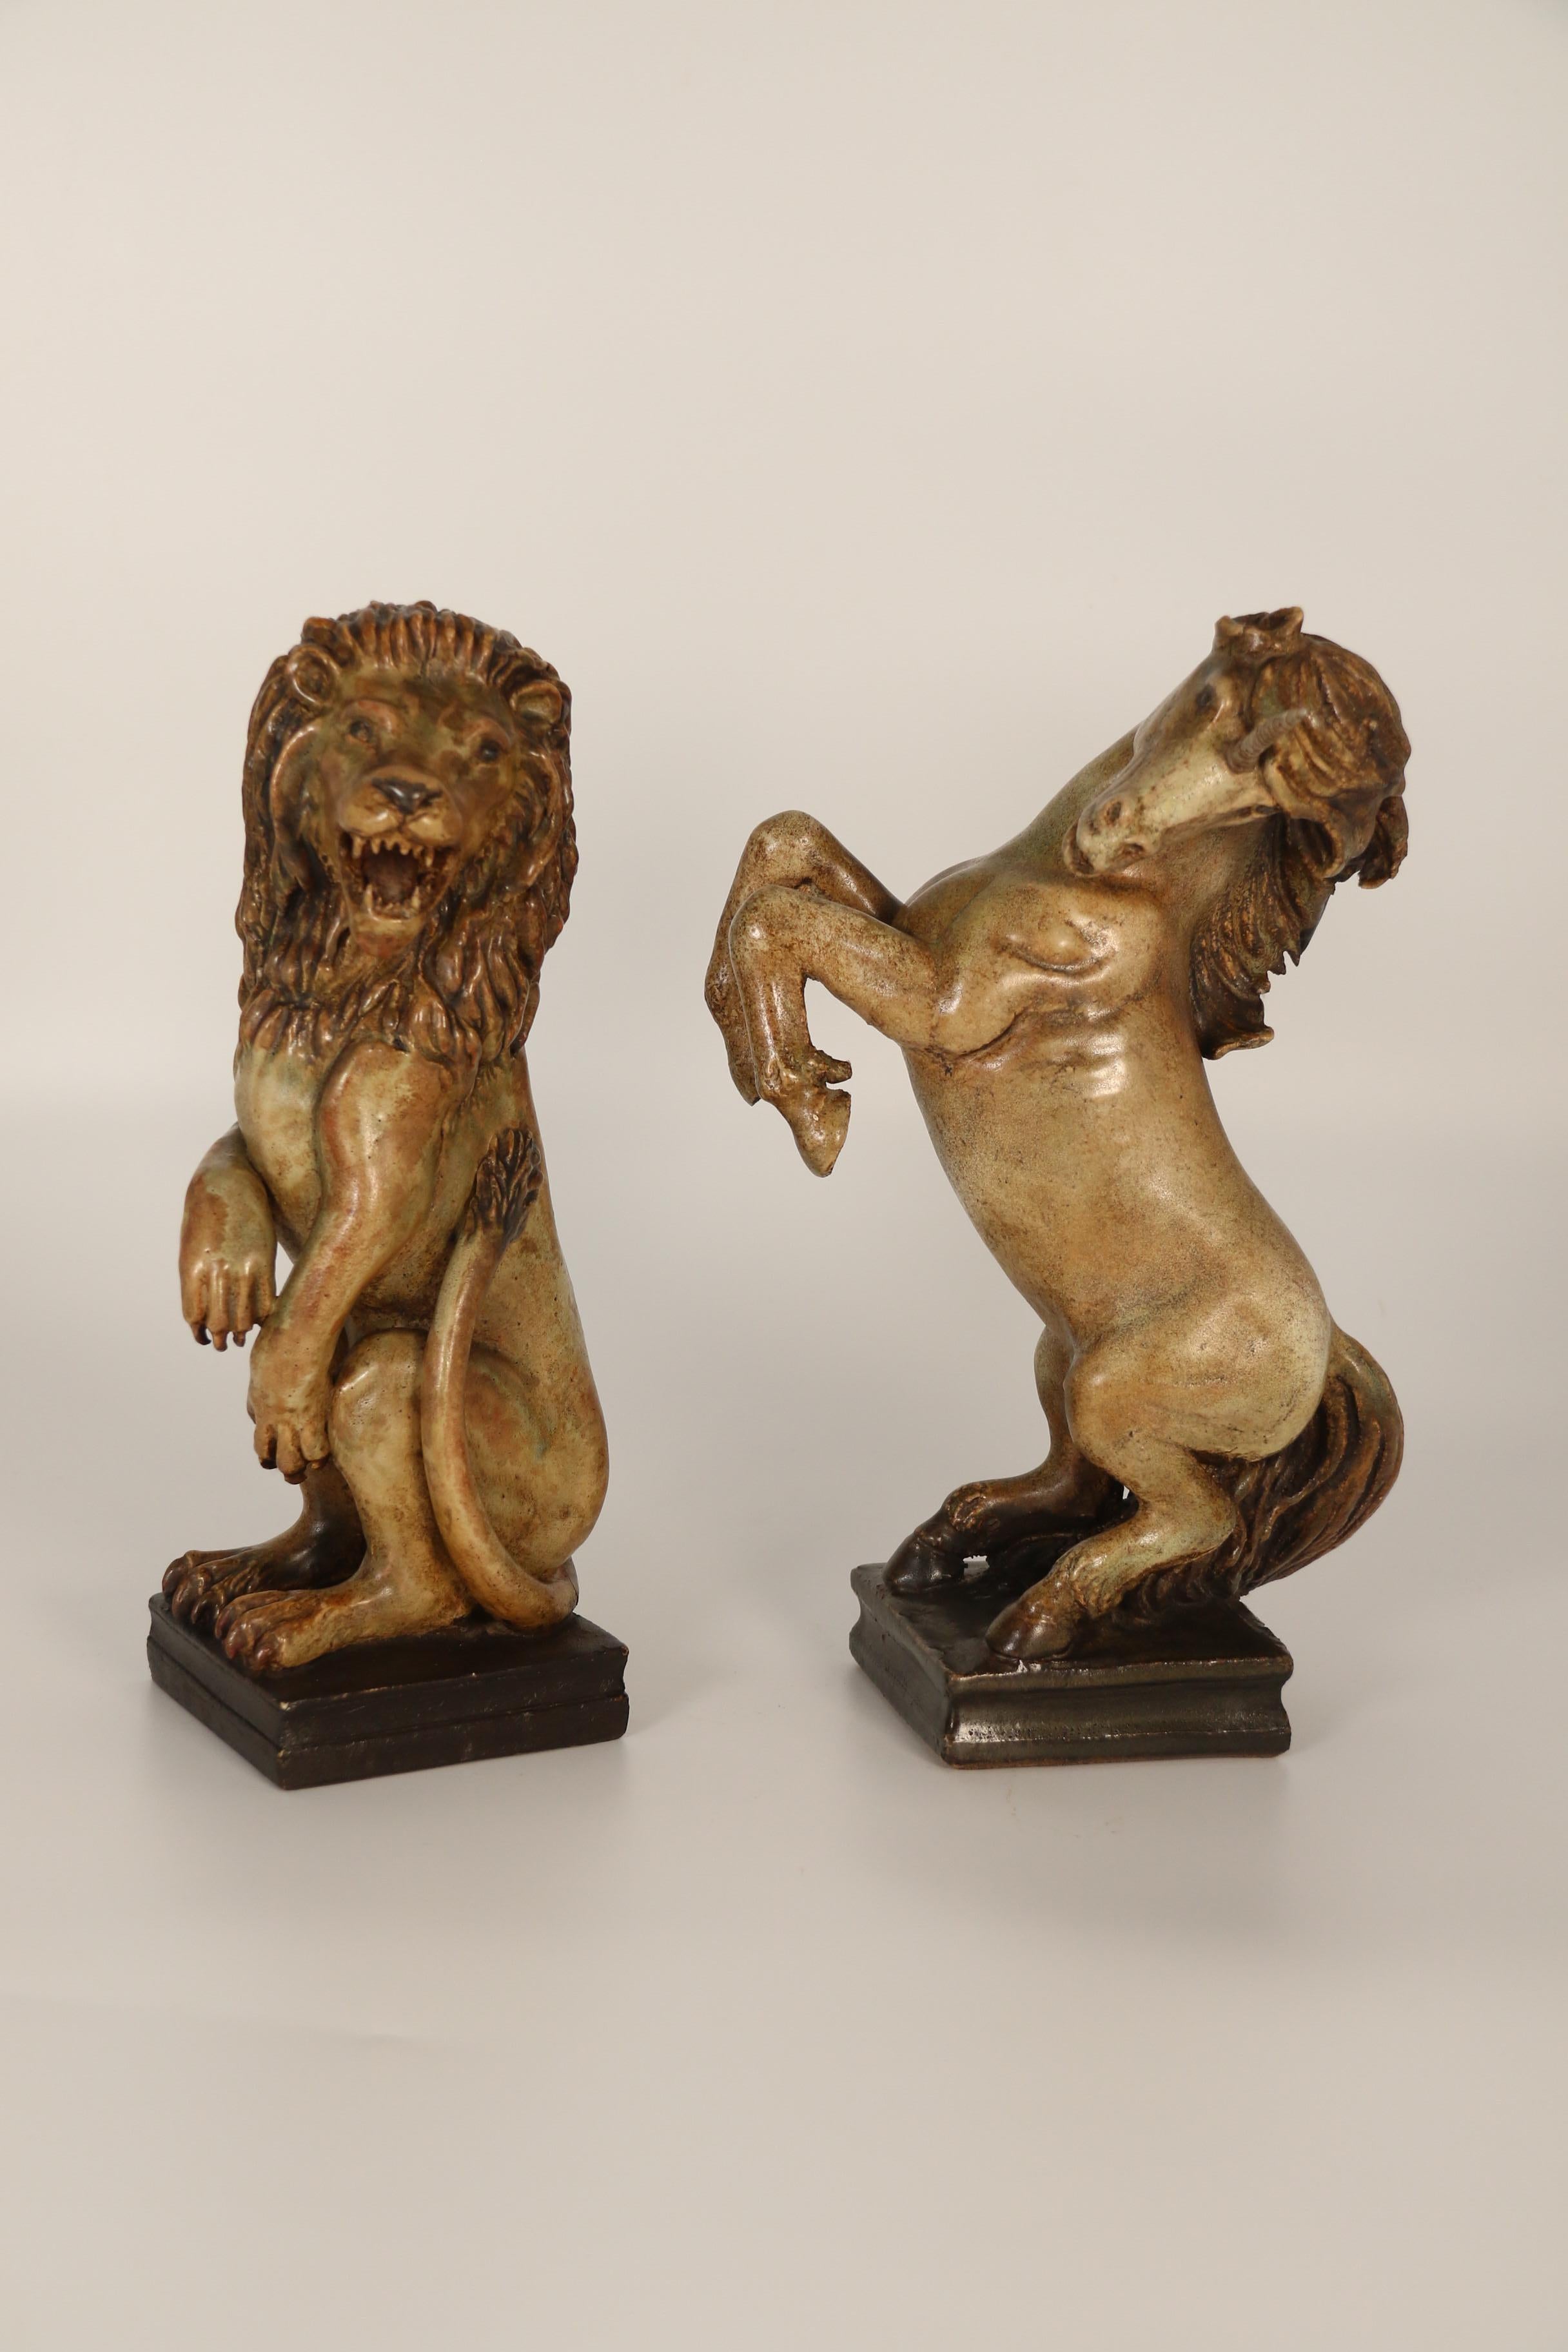 Folk Art A pair of art pottery hand sculpted figures of a heraldic lion and unicorn. For Sale